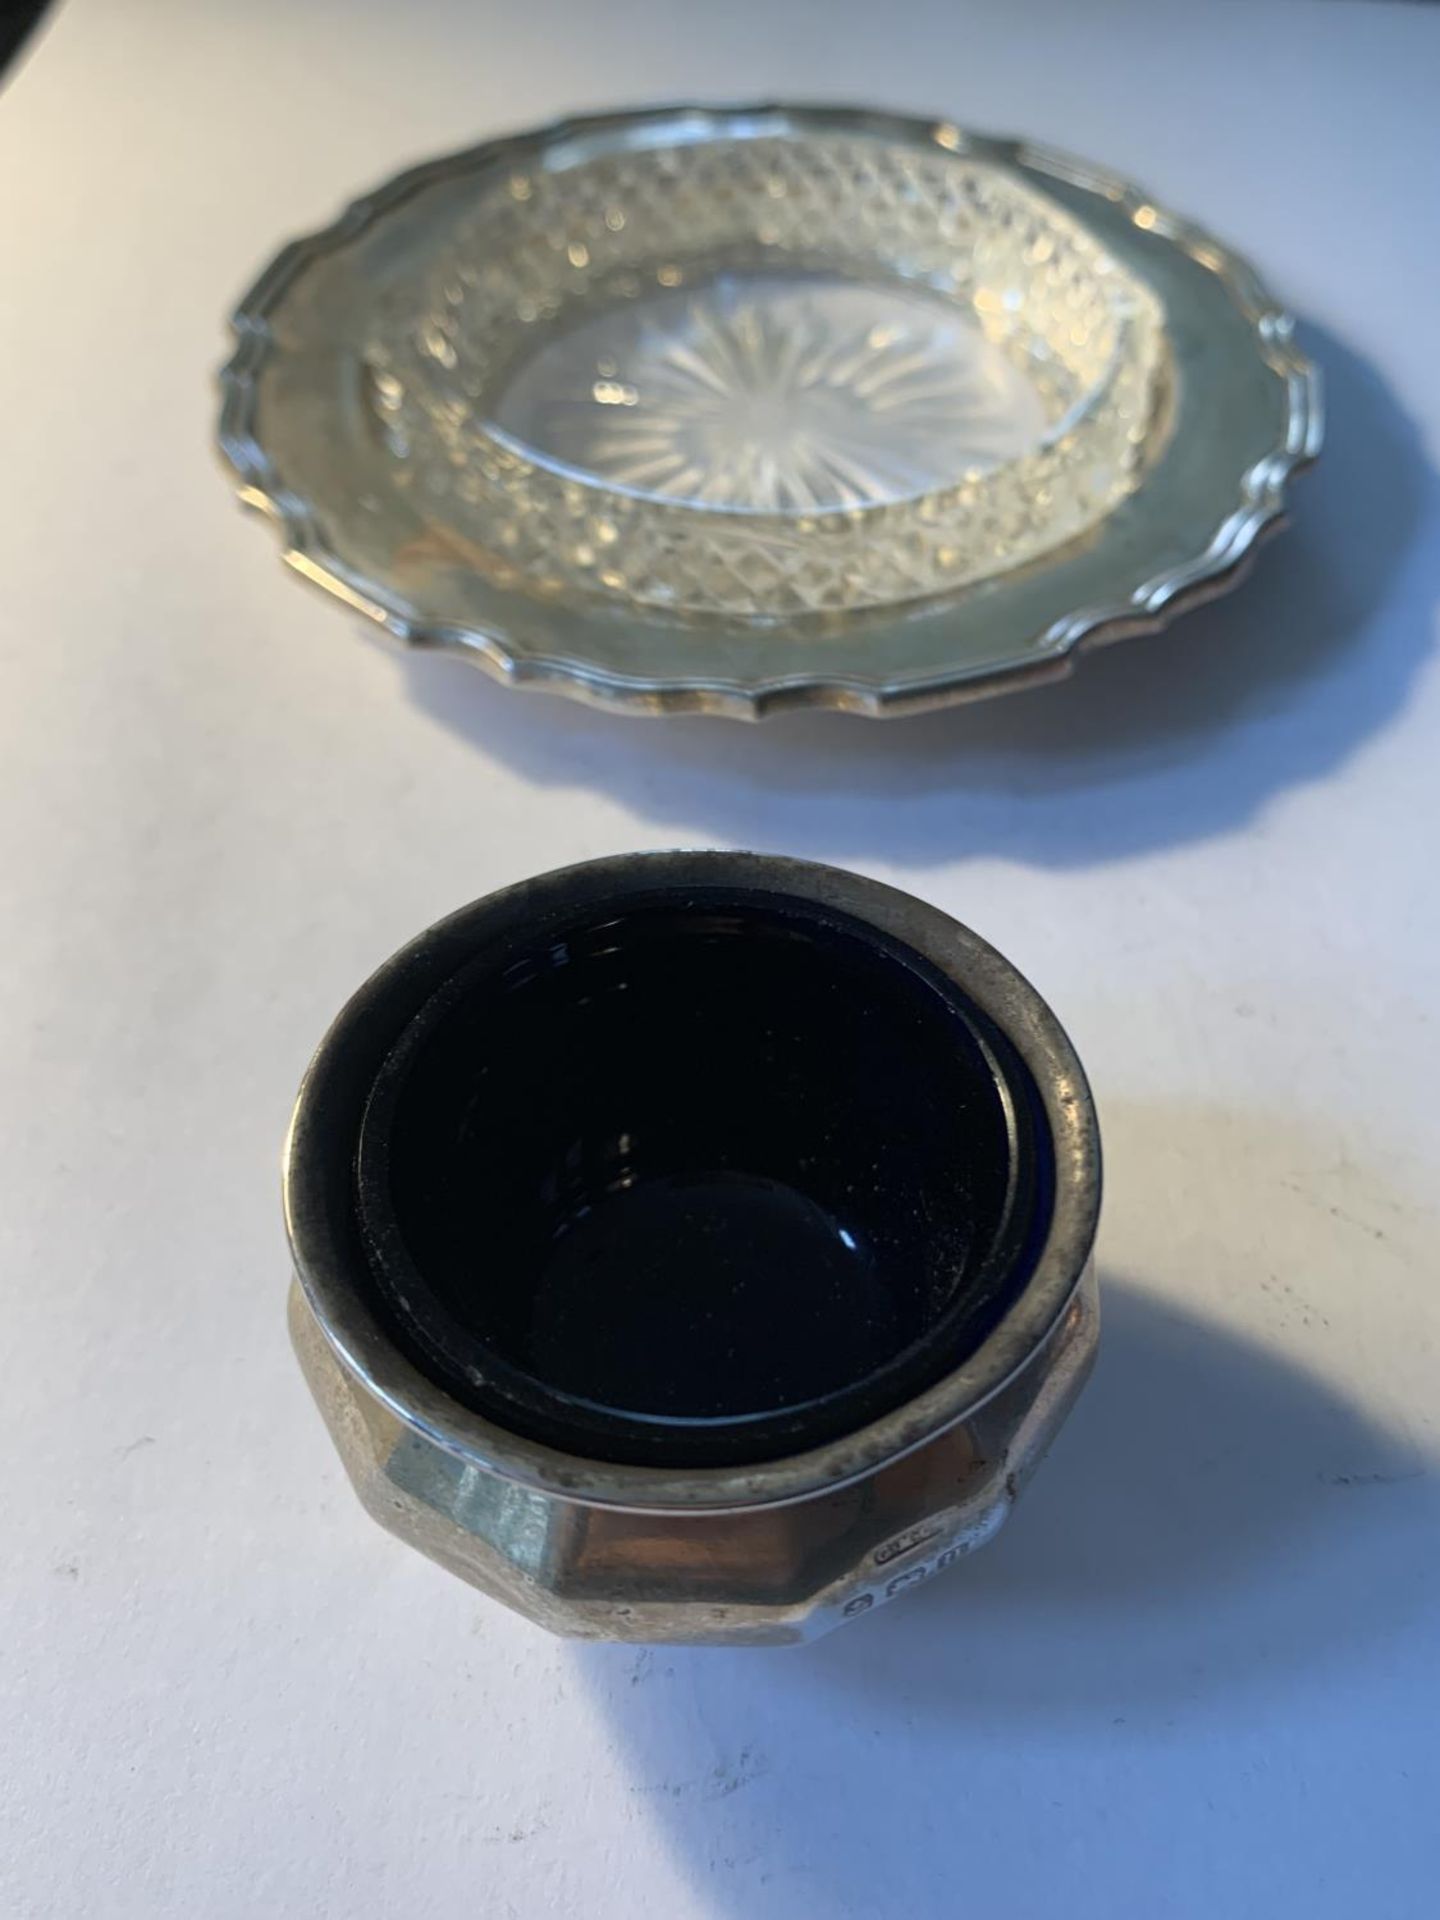 A HALLMARKED BIRMINGHAM SILVER SALT WITH BLUE GLASS LINER AND A HALLMARKED SHEFFIELD DISH WITH GLASS